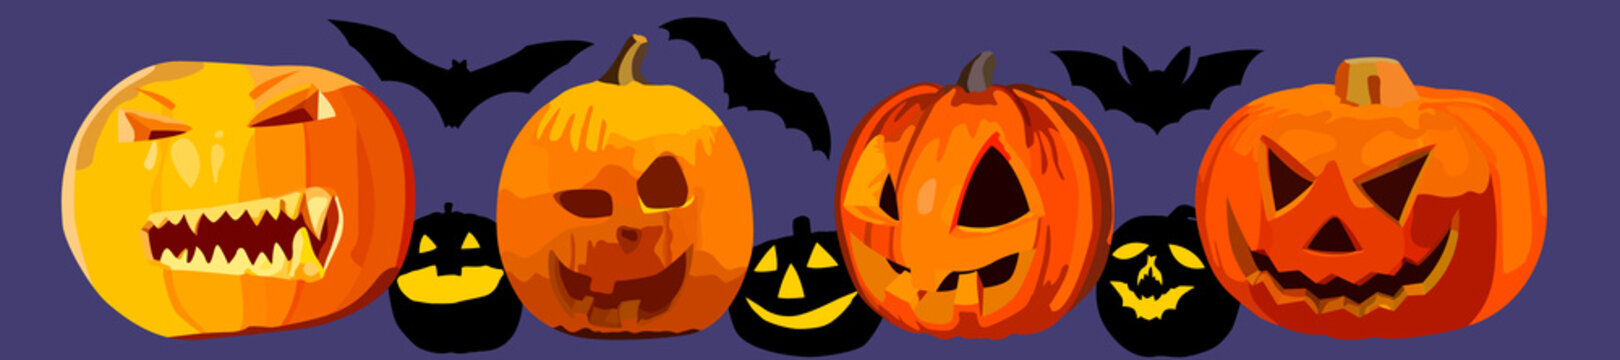 Images for Halloween with three-dimensional pumpkins and their silhouettes and bats .